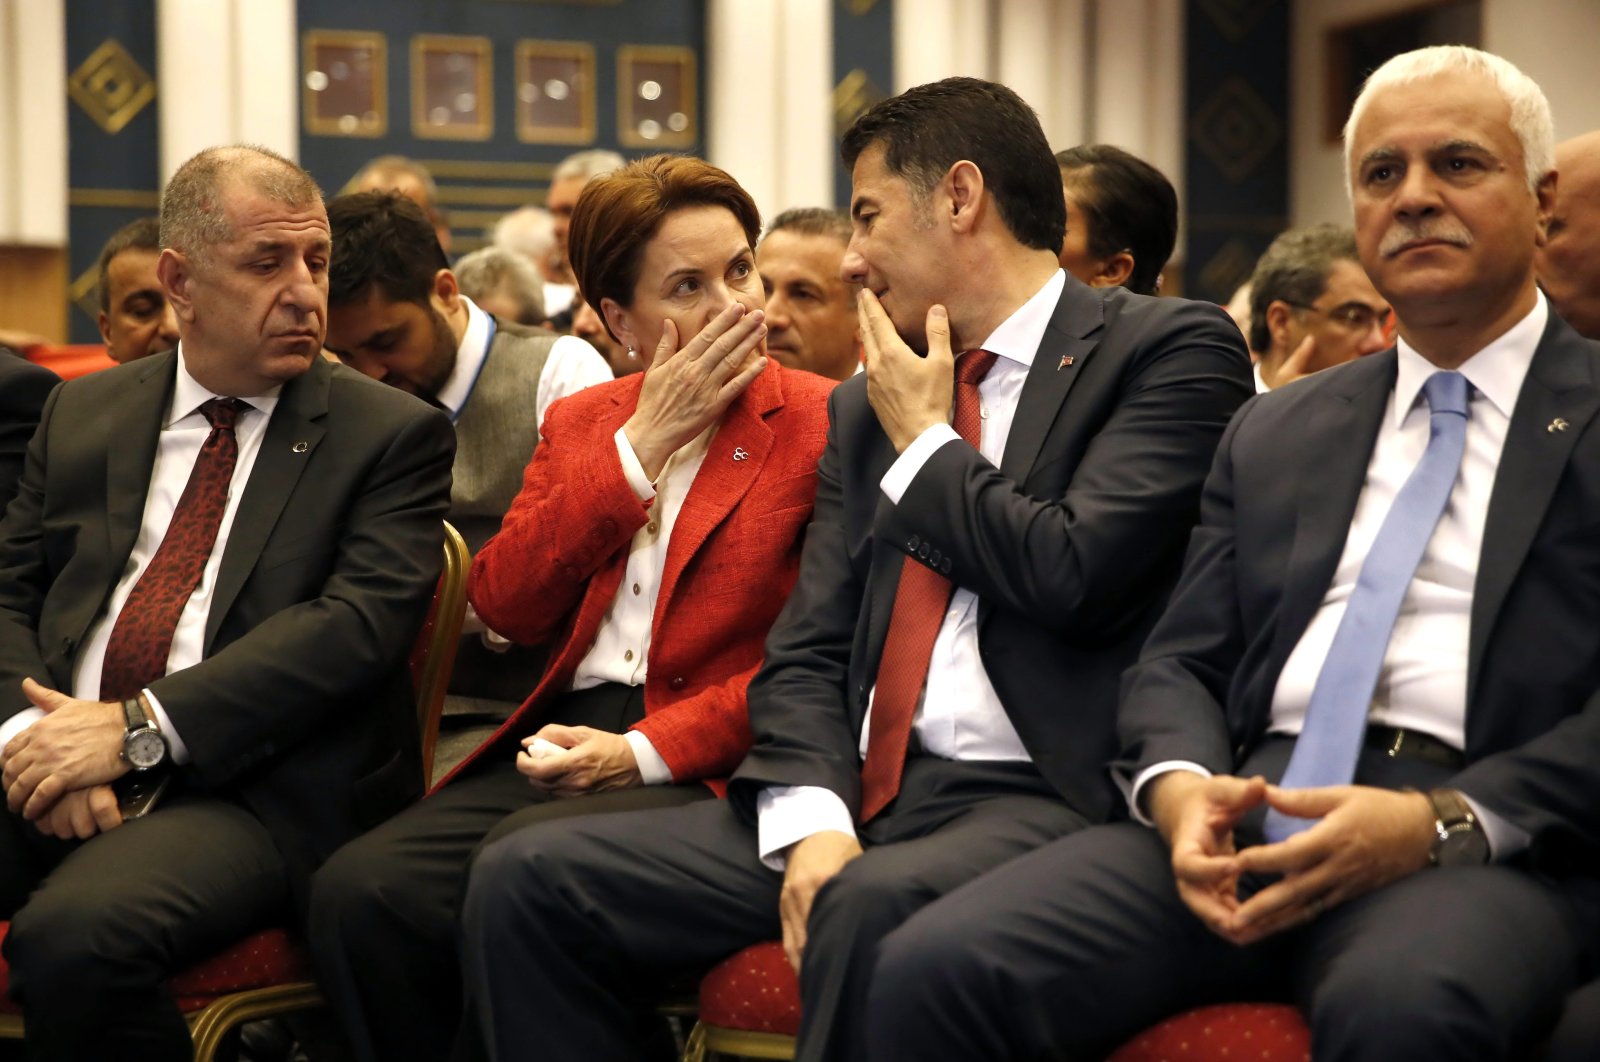 Koray Aydın (4th R) attends the Nationalist Movement Party’s (MHP) congress with Meral Akşener (2nd L) and Sinan Oğan (C), in the capital Ankara, Türkiye, June 19, 2016. (Sabah File Photo)